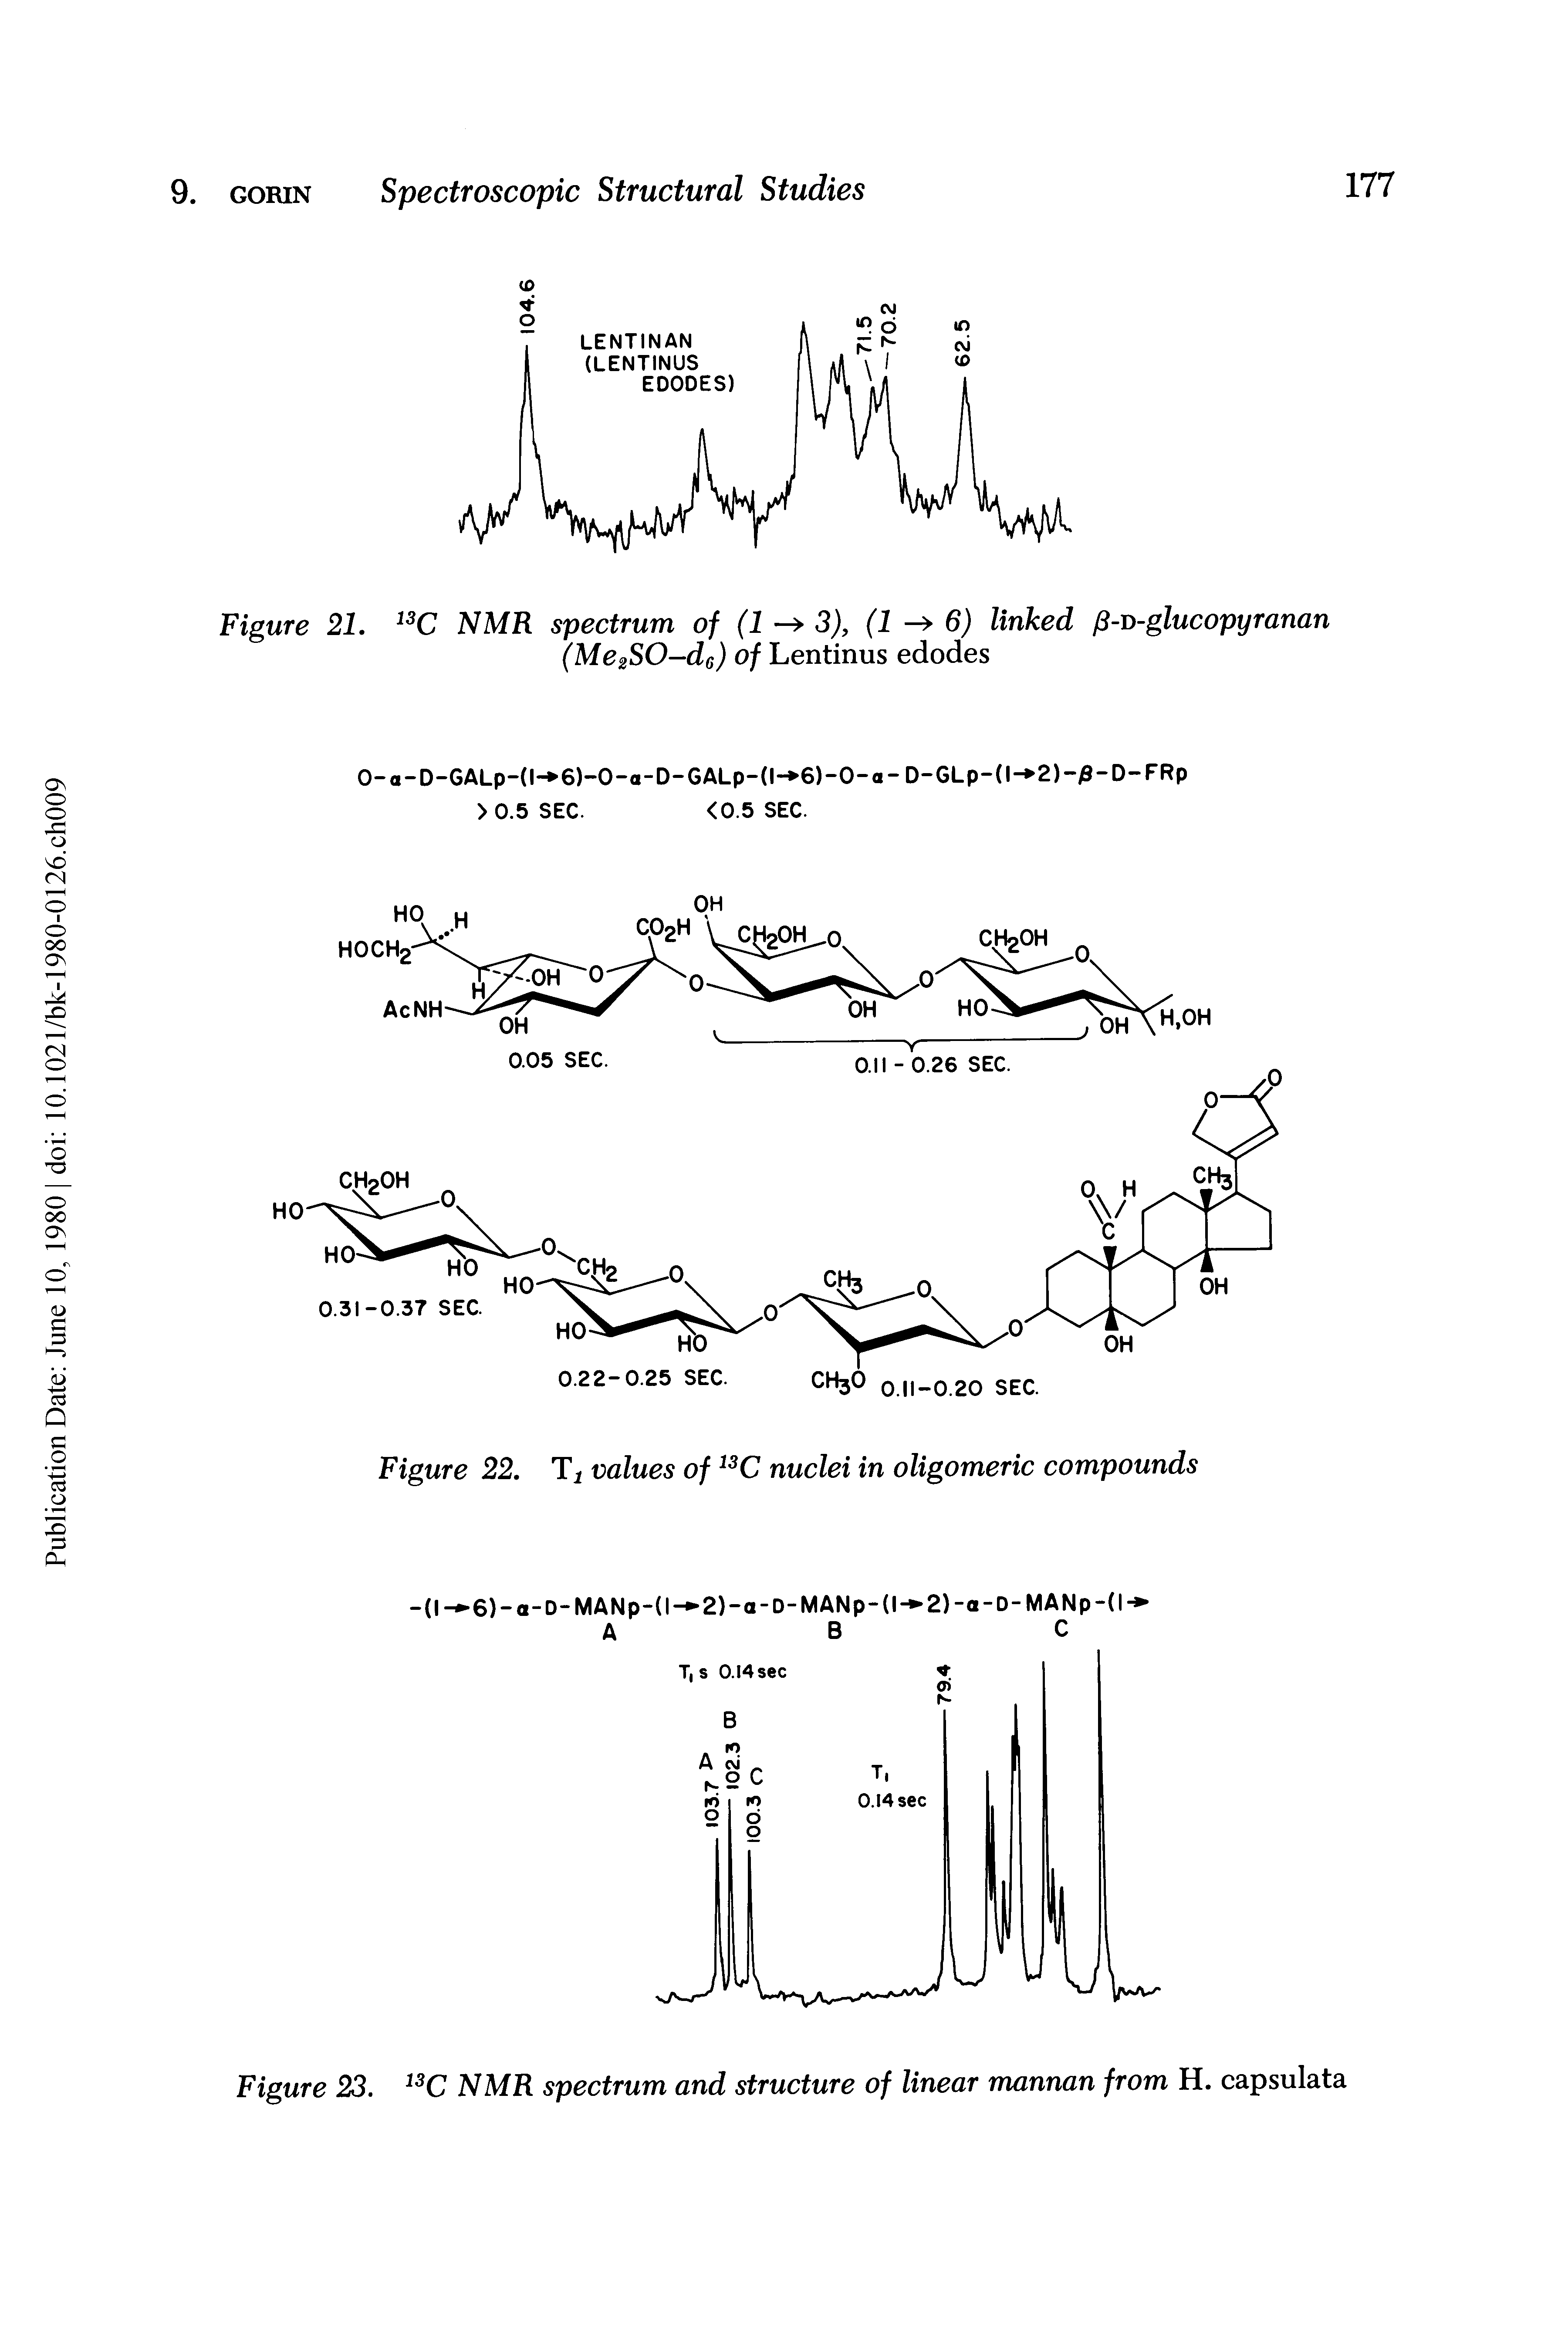 Figure 23. NMR spectrum and structure of linear mannan from H. capsulata...